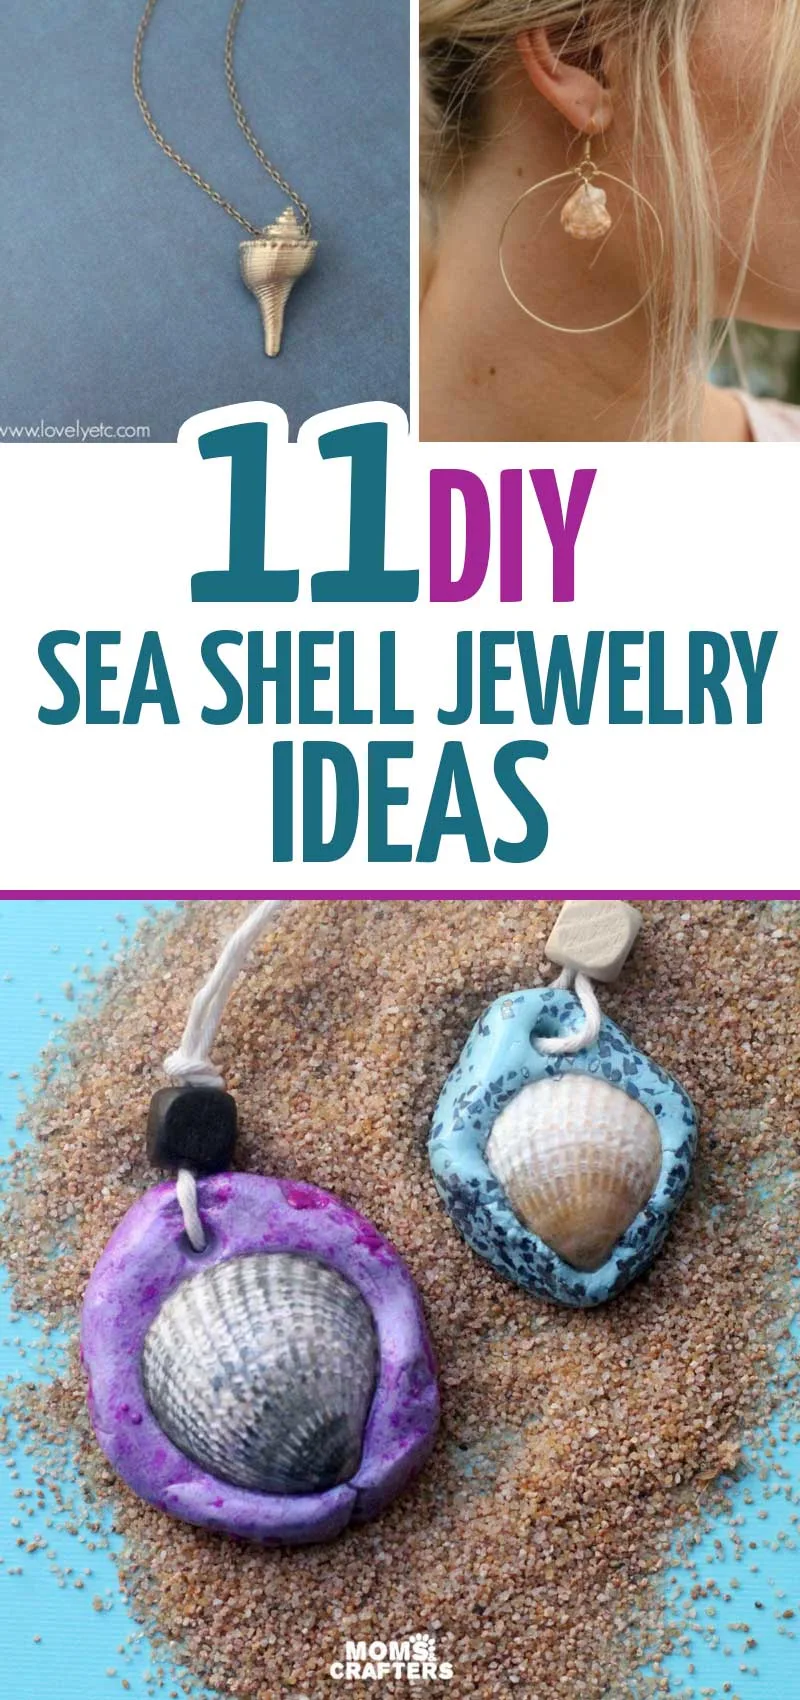 If you love seashell jewelry DIY ideas you'll love this list of seashell necklaces bracelets and earrings! These cool sea shell craft ideas are fun summer crafts for teens and tweens, and everyone else!